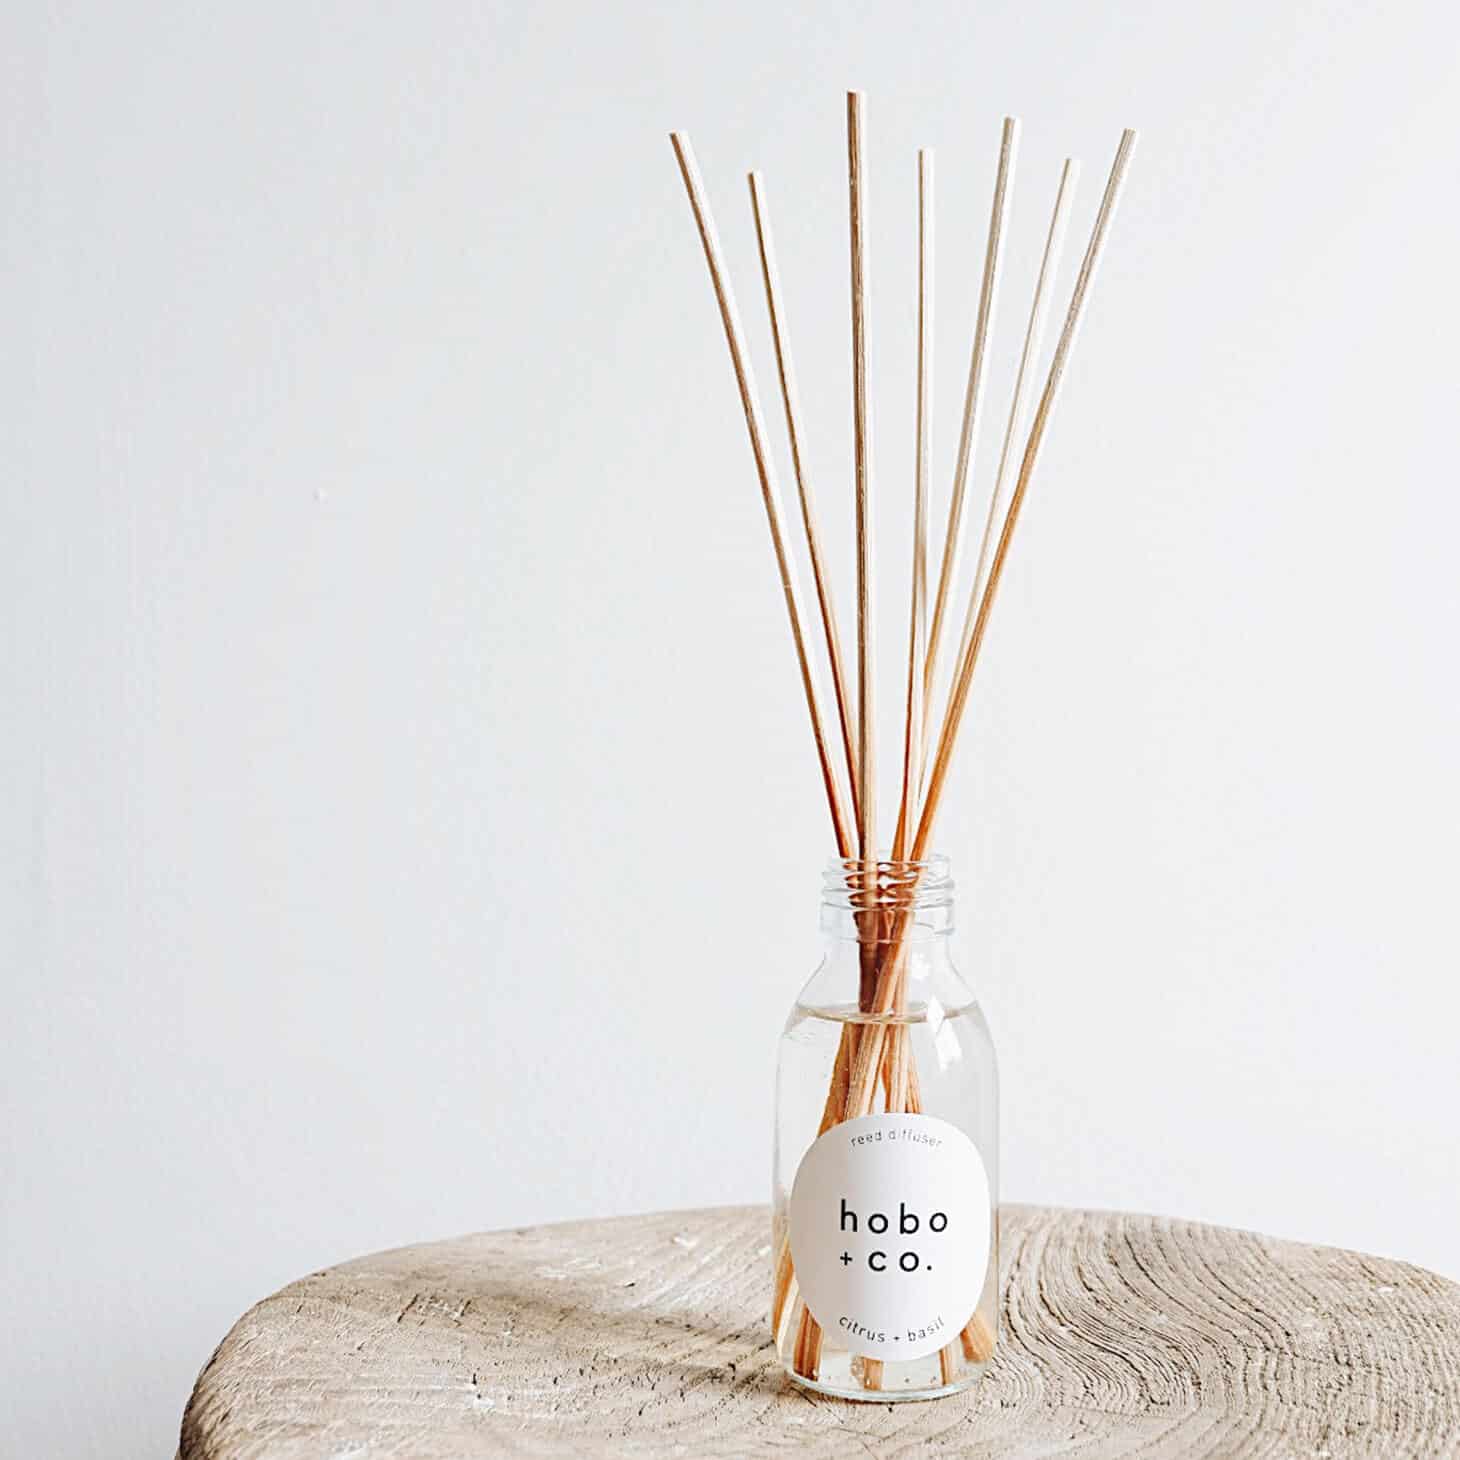 Hobo + Co. Citrus & Basil Reed Diffuser - Osmology Scented Candles & Home Fragrance